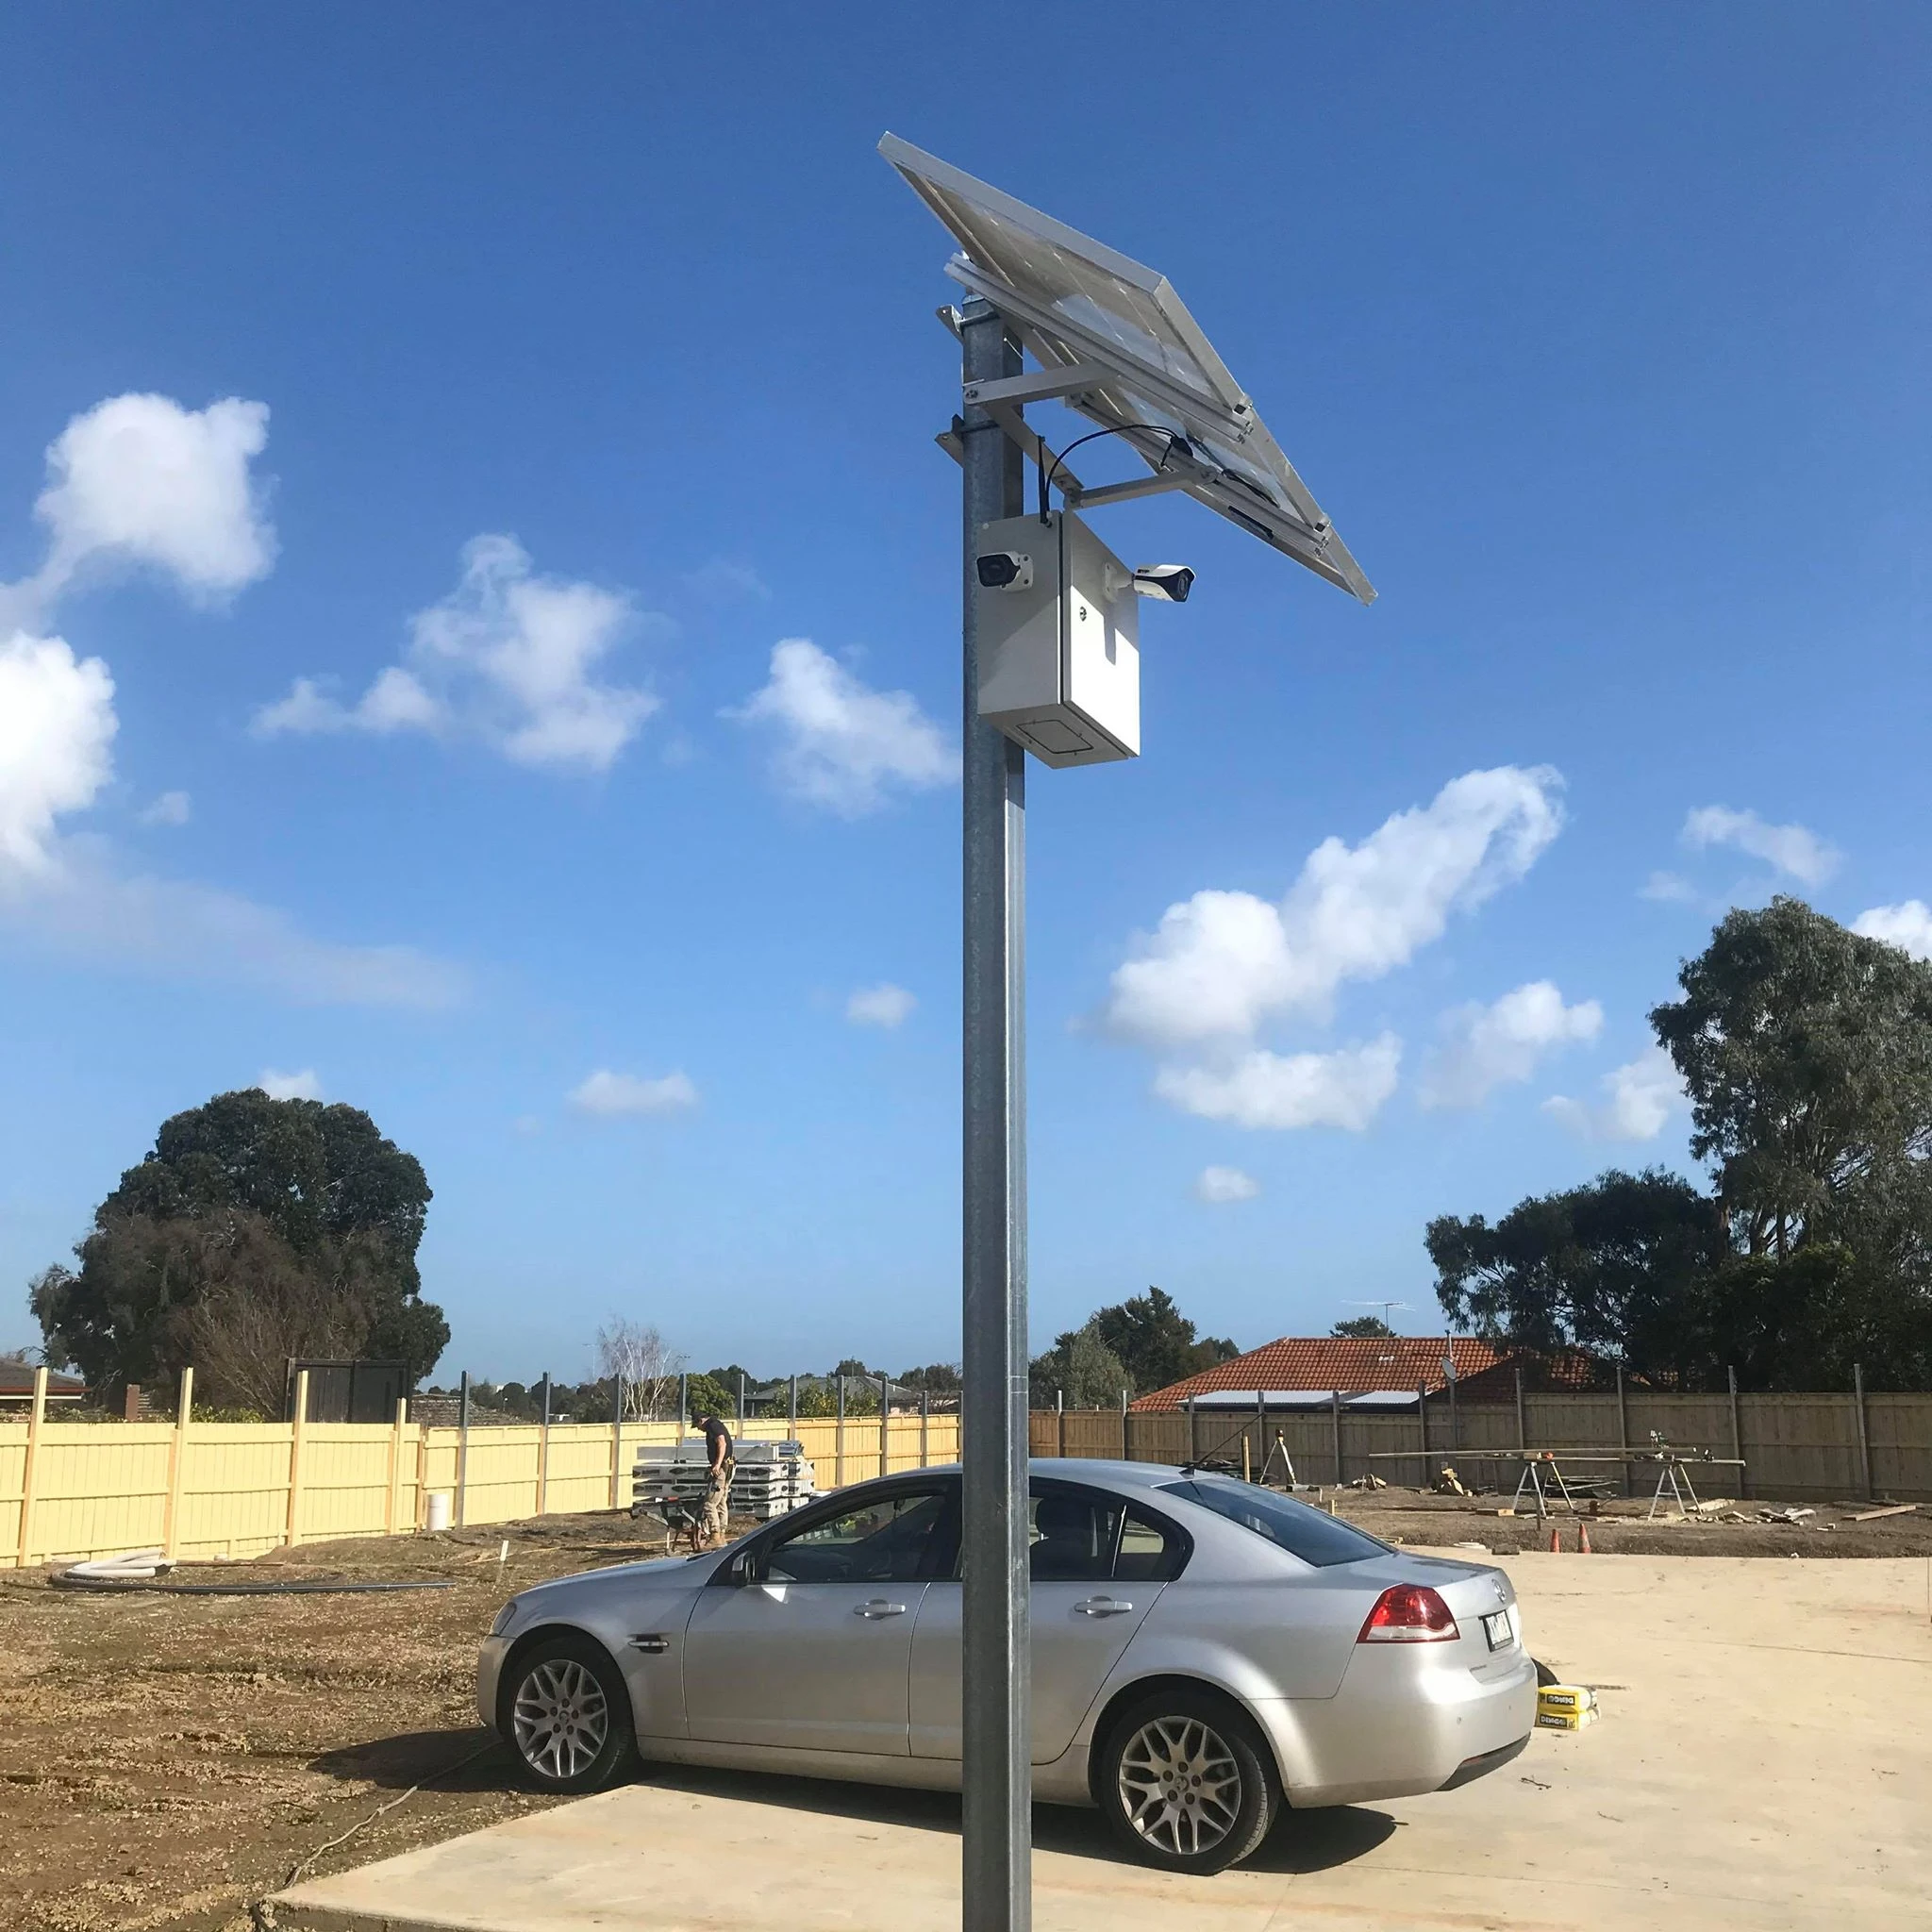 360 degree solar camera system for project site